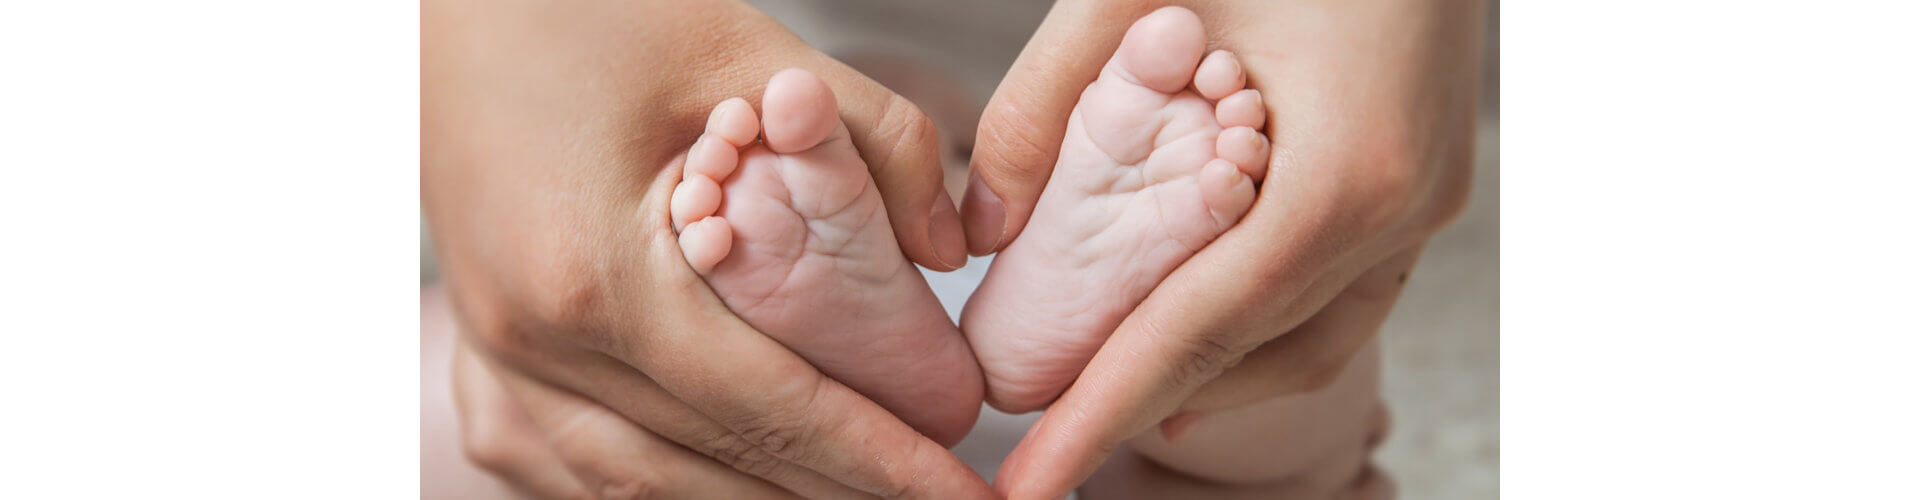 Small newborn baby legs in mothers lovely hand with soft focus on babie's foot